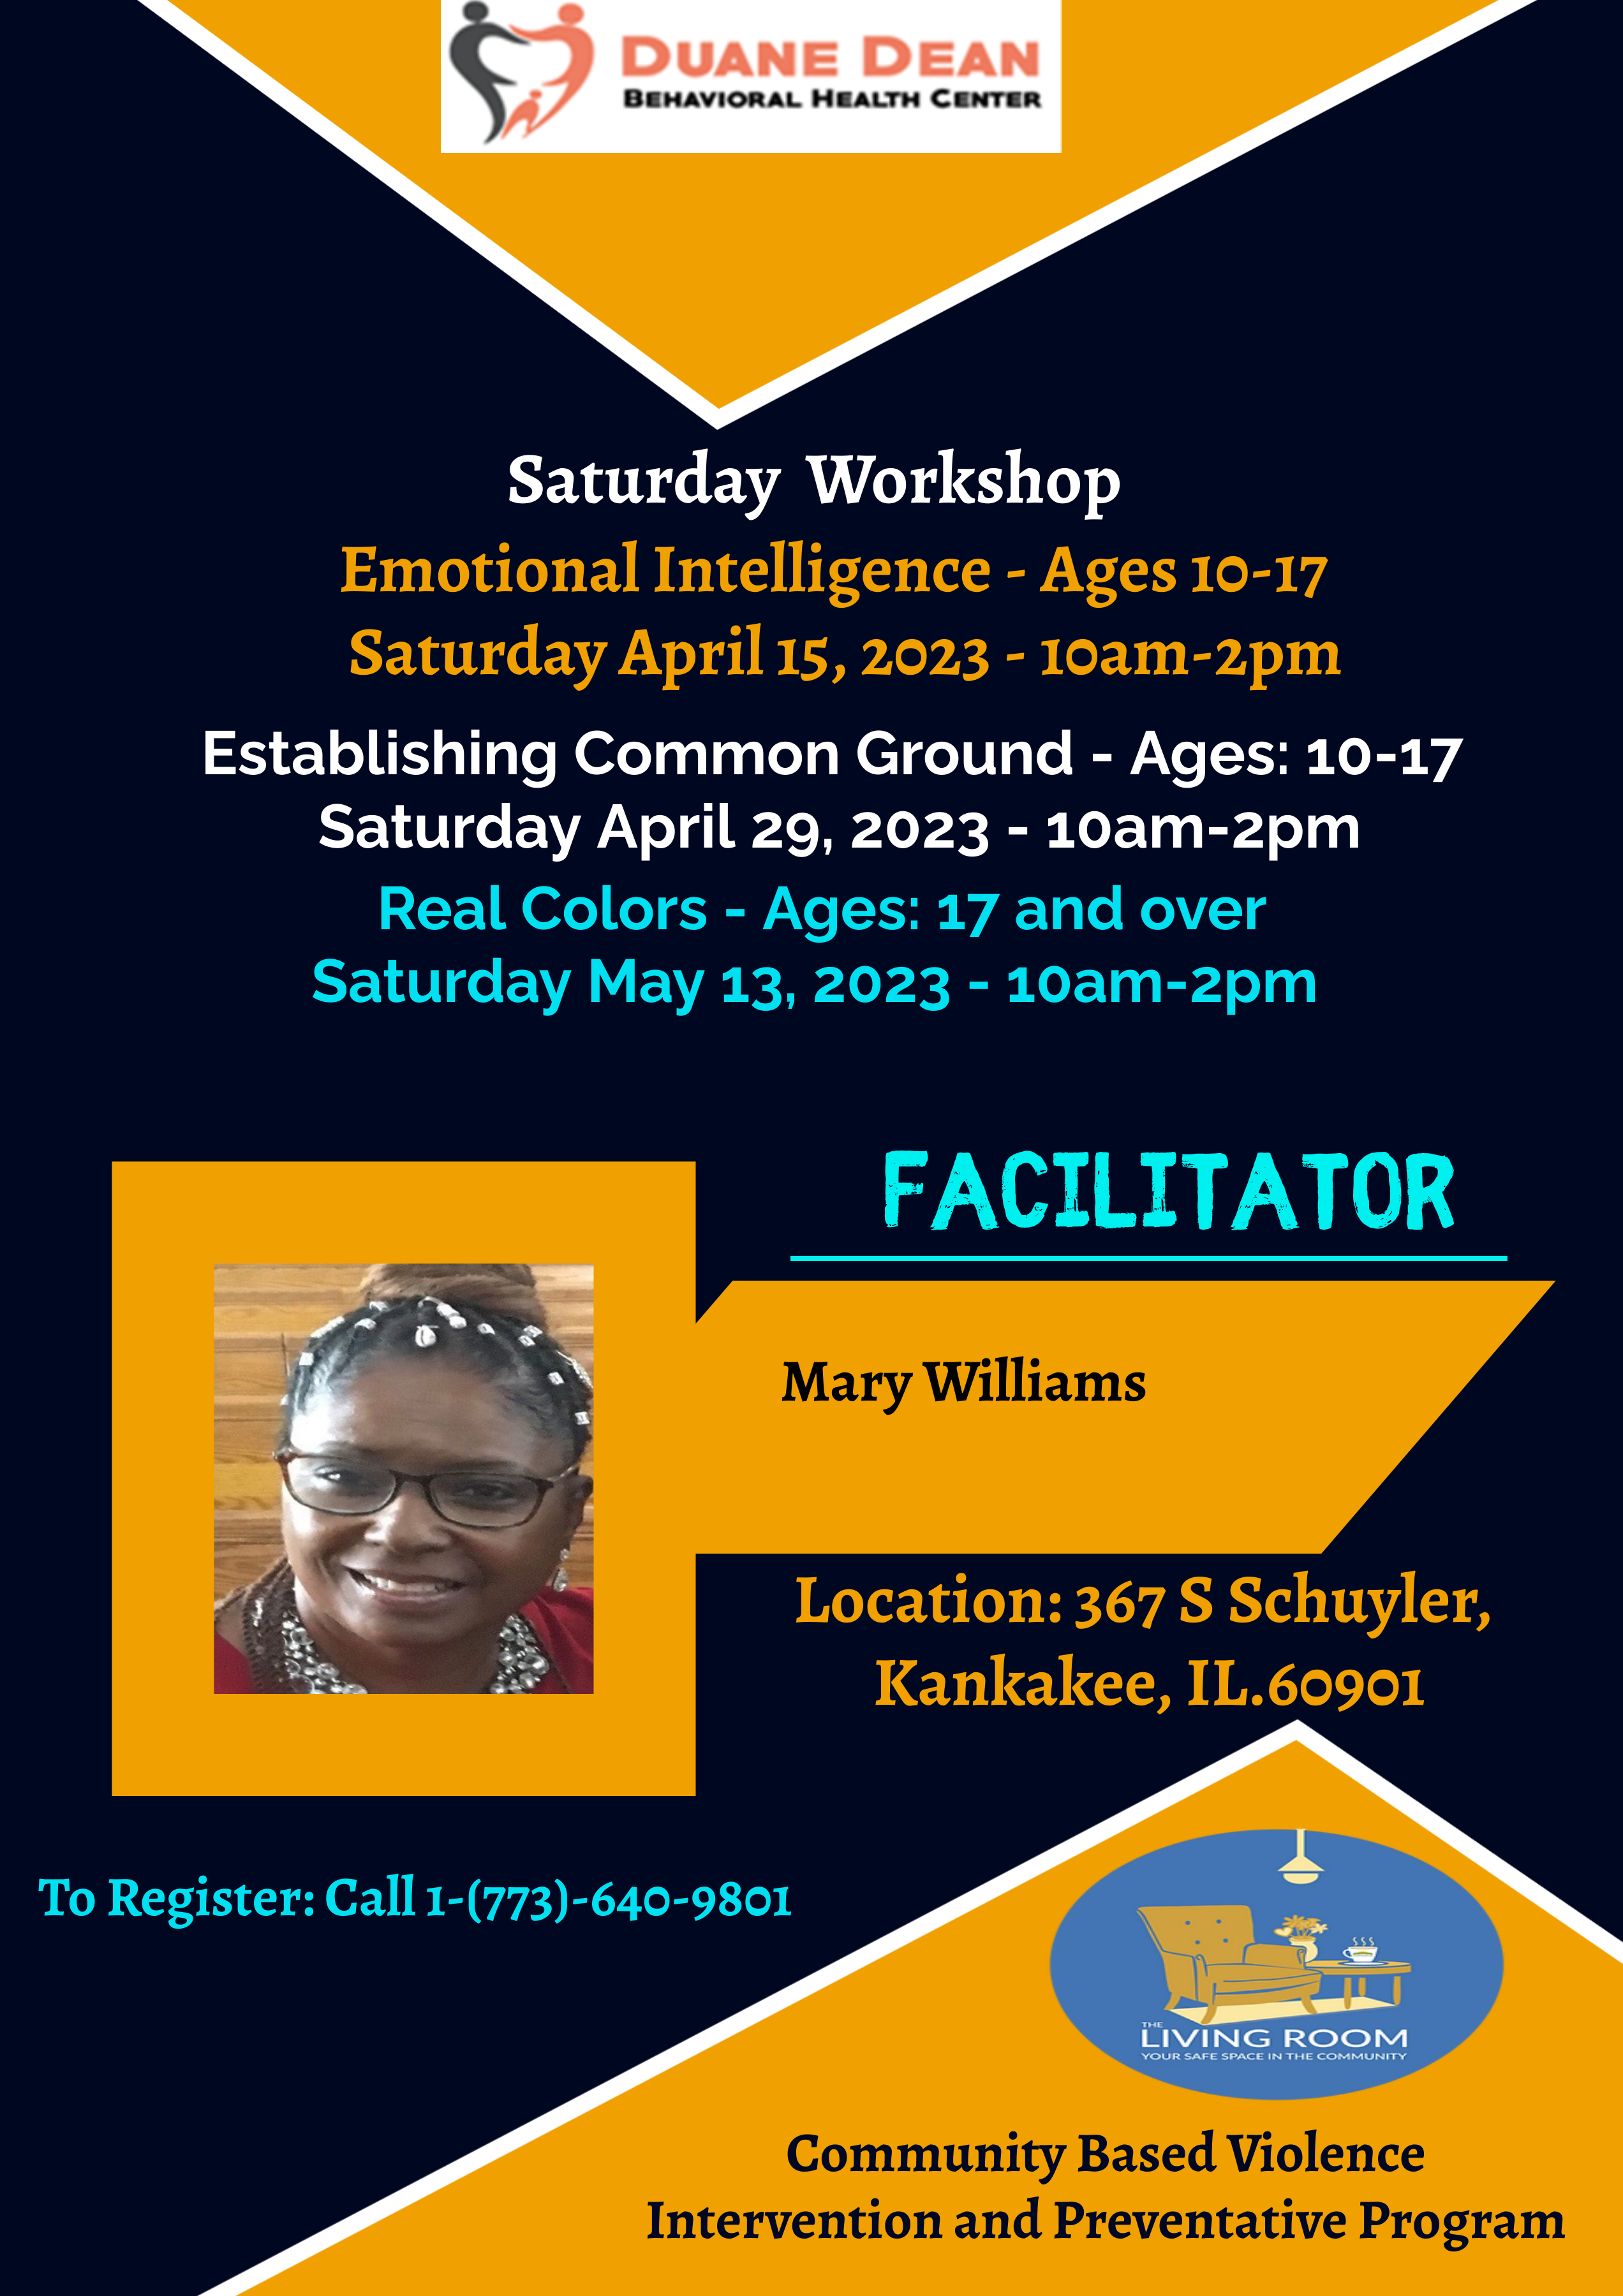 Saturday Workshop with Mary Williams